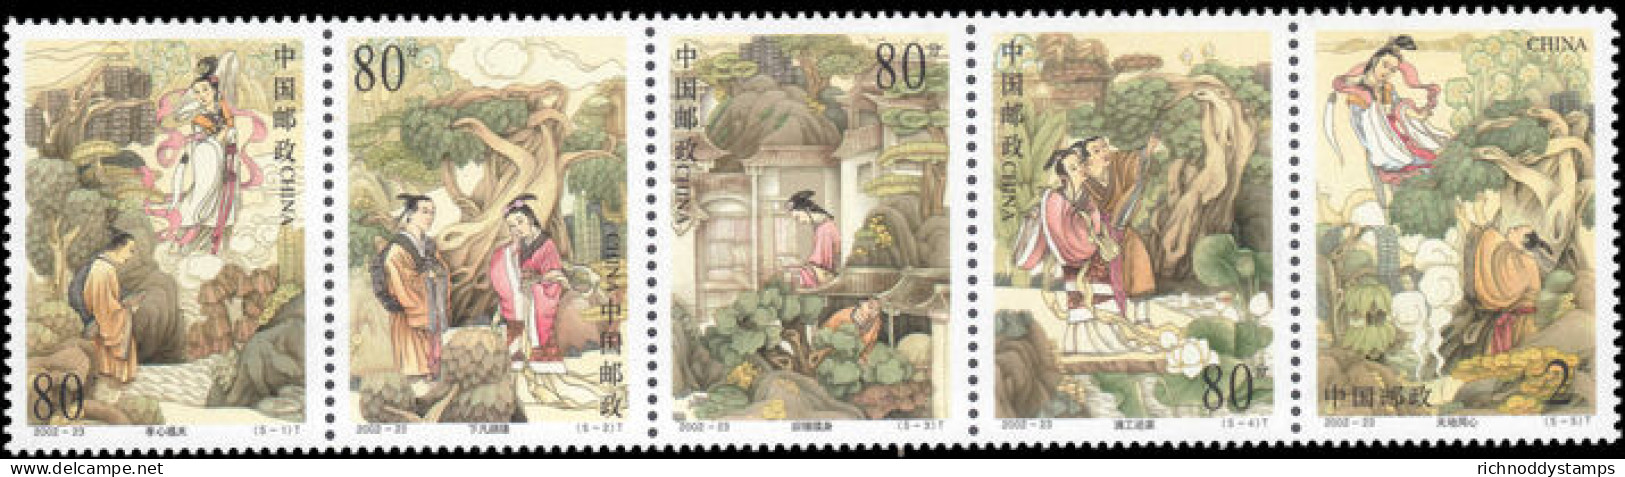 Peoples Republic Of China 2002 Tale Of Dong Yong And The Seventh Immortal Maiden Unmounted Mint. - Neufs